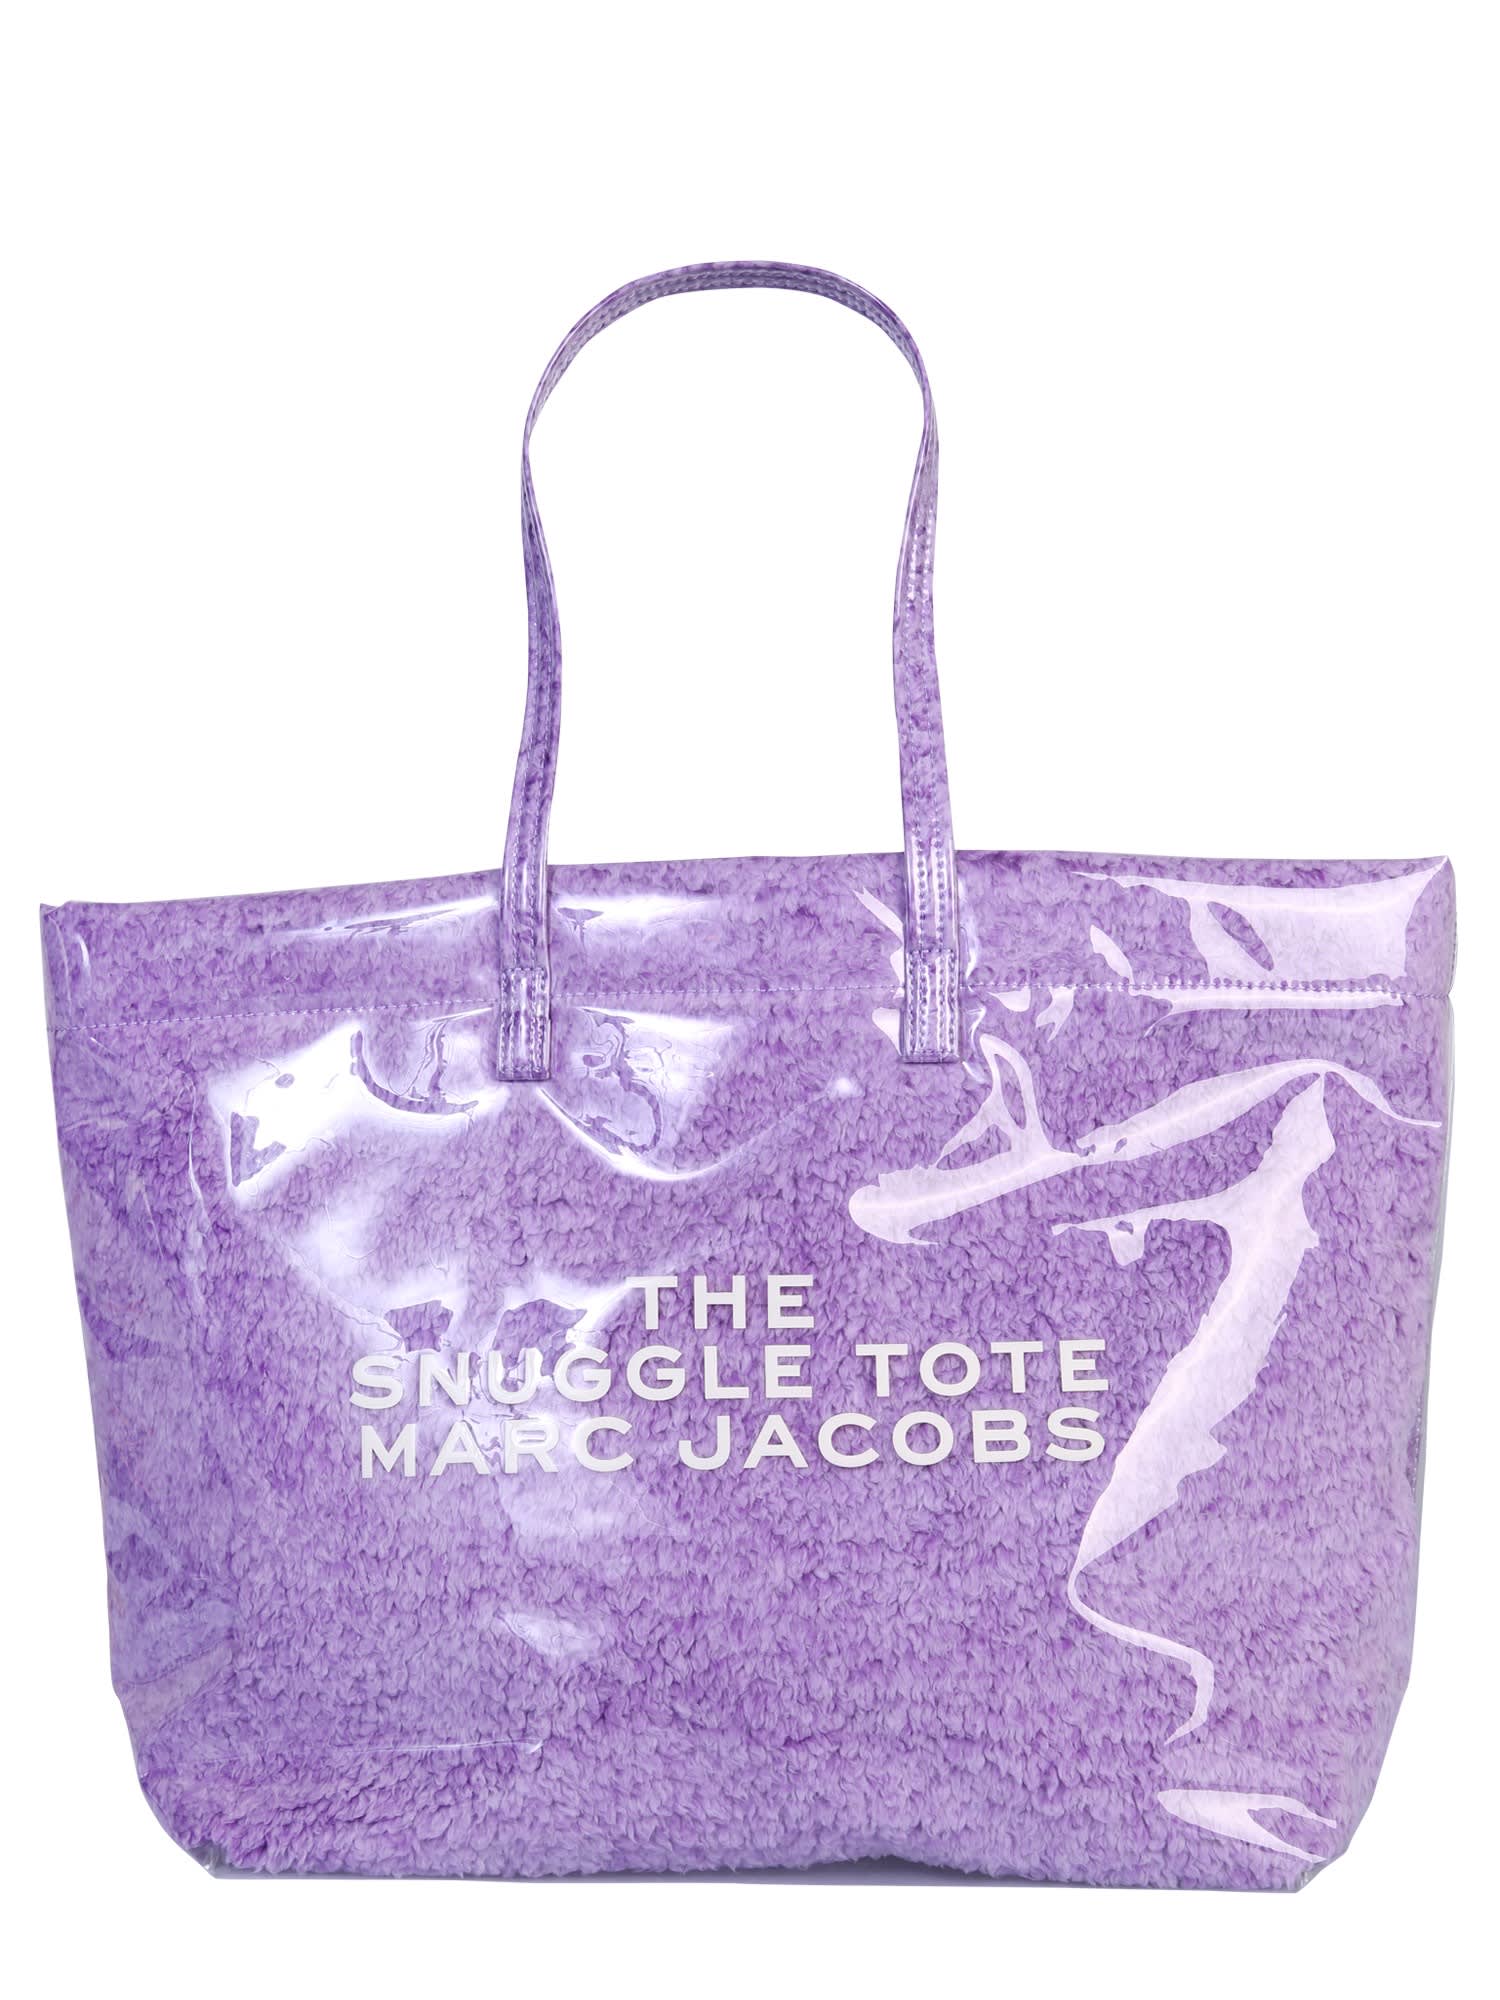 MARC JACOBS THE SNUGGLE TOTE BAG,11210196